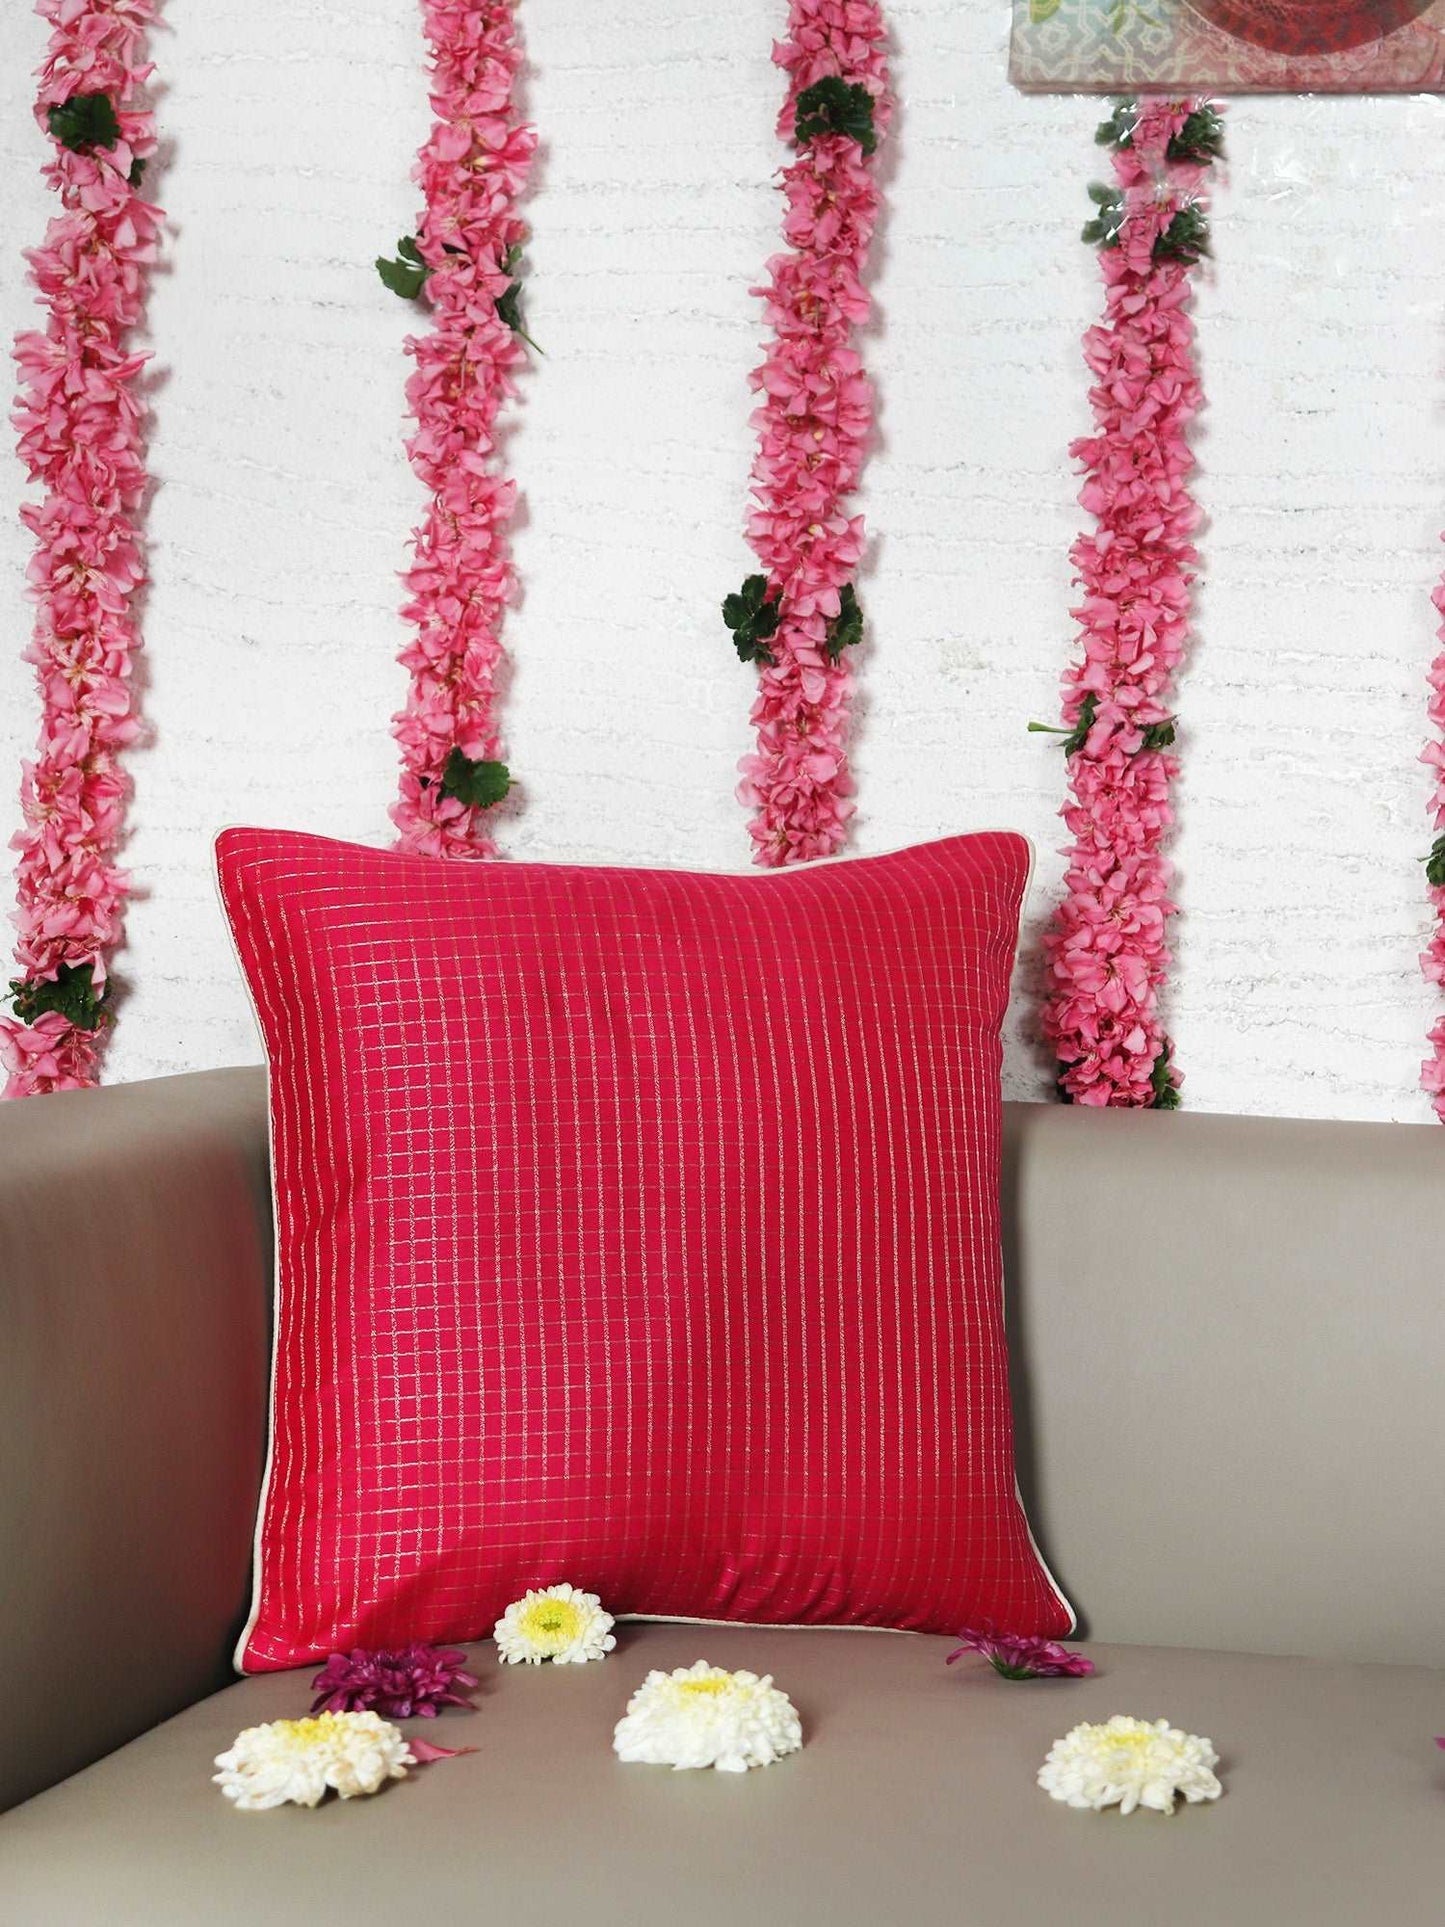 Cushion Cover for Sofa, Bed Varanasi Silk Cord Piping | Pink - 16x16in(40x40cm) (Pack of 1)